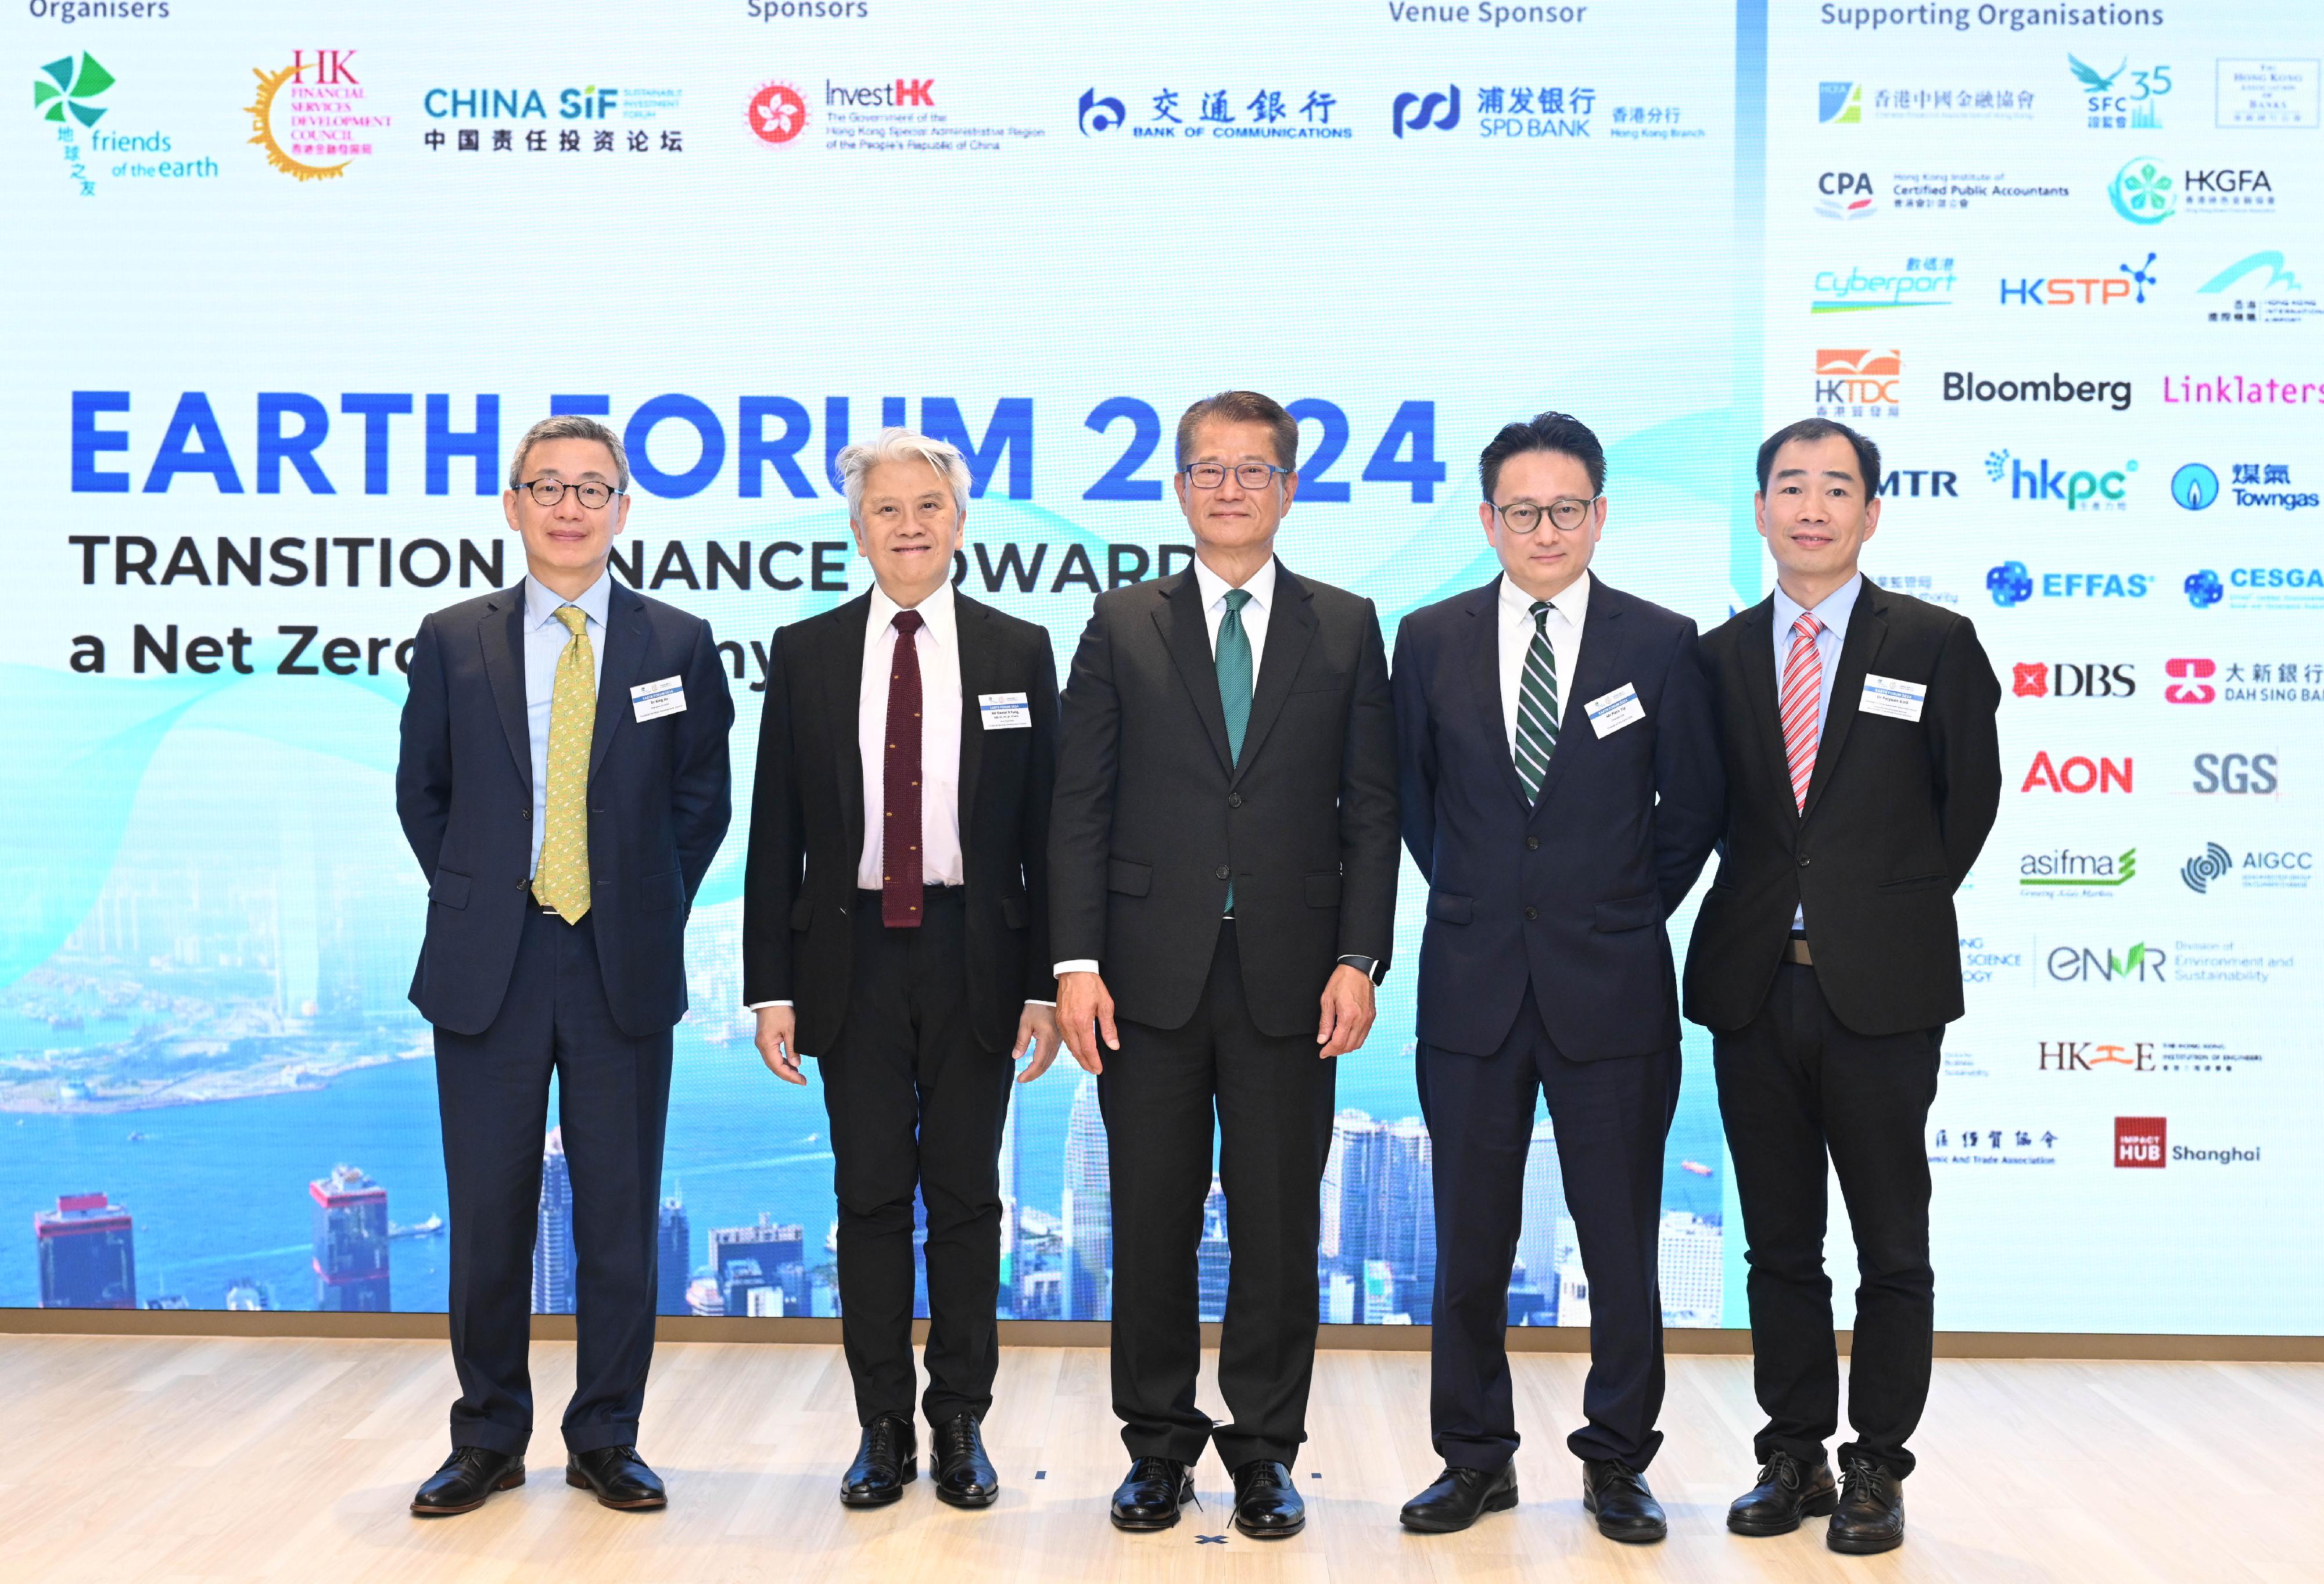 The Financial Secretary, Mr Paul Chan, attended the Earth Forum 2024 today (April 22). Photo shows (from left) the Executive Director of the Financial Services Development Council, Dr King Au; Vice-Chairman of the Financial Services Development Council Mr Daniel Fung, SC; Mr Chan; the Chairperson of the Friends of the Earth (HK), Mr Plato Yip; and the Chairman of China Sustainable Investment Forum, Dr Guo Peiyuan, at the forum.